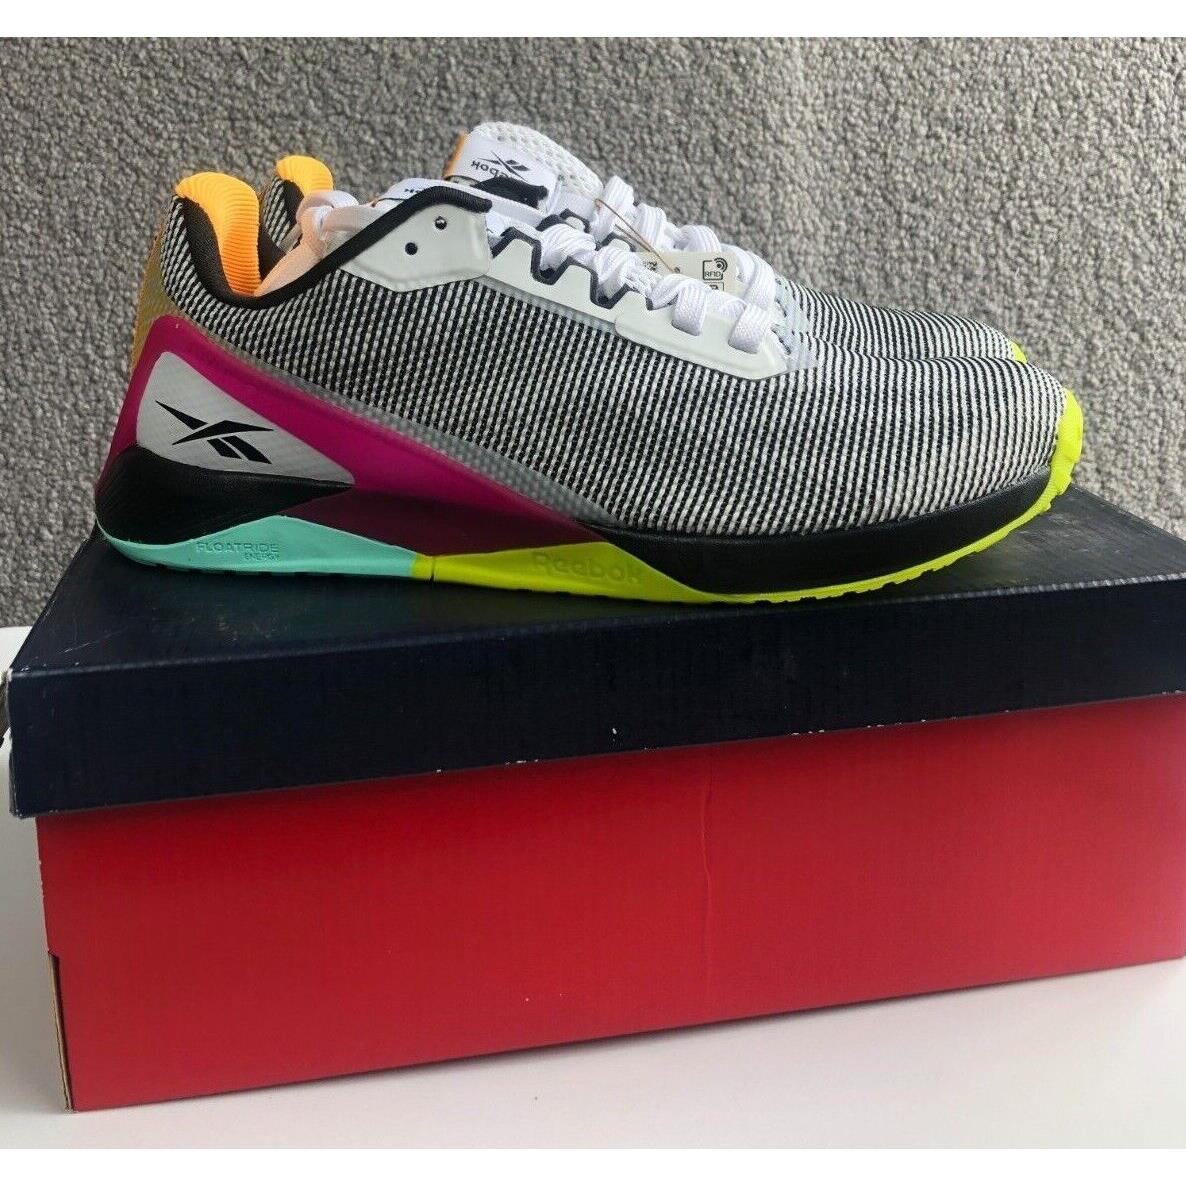 Reebok Shoes Nano X1 Grit Womens 10 Colorful Running Gym Sneakers Trainers